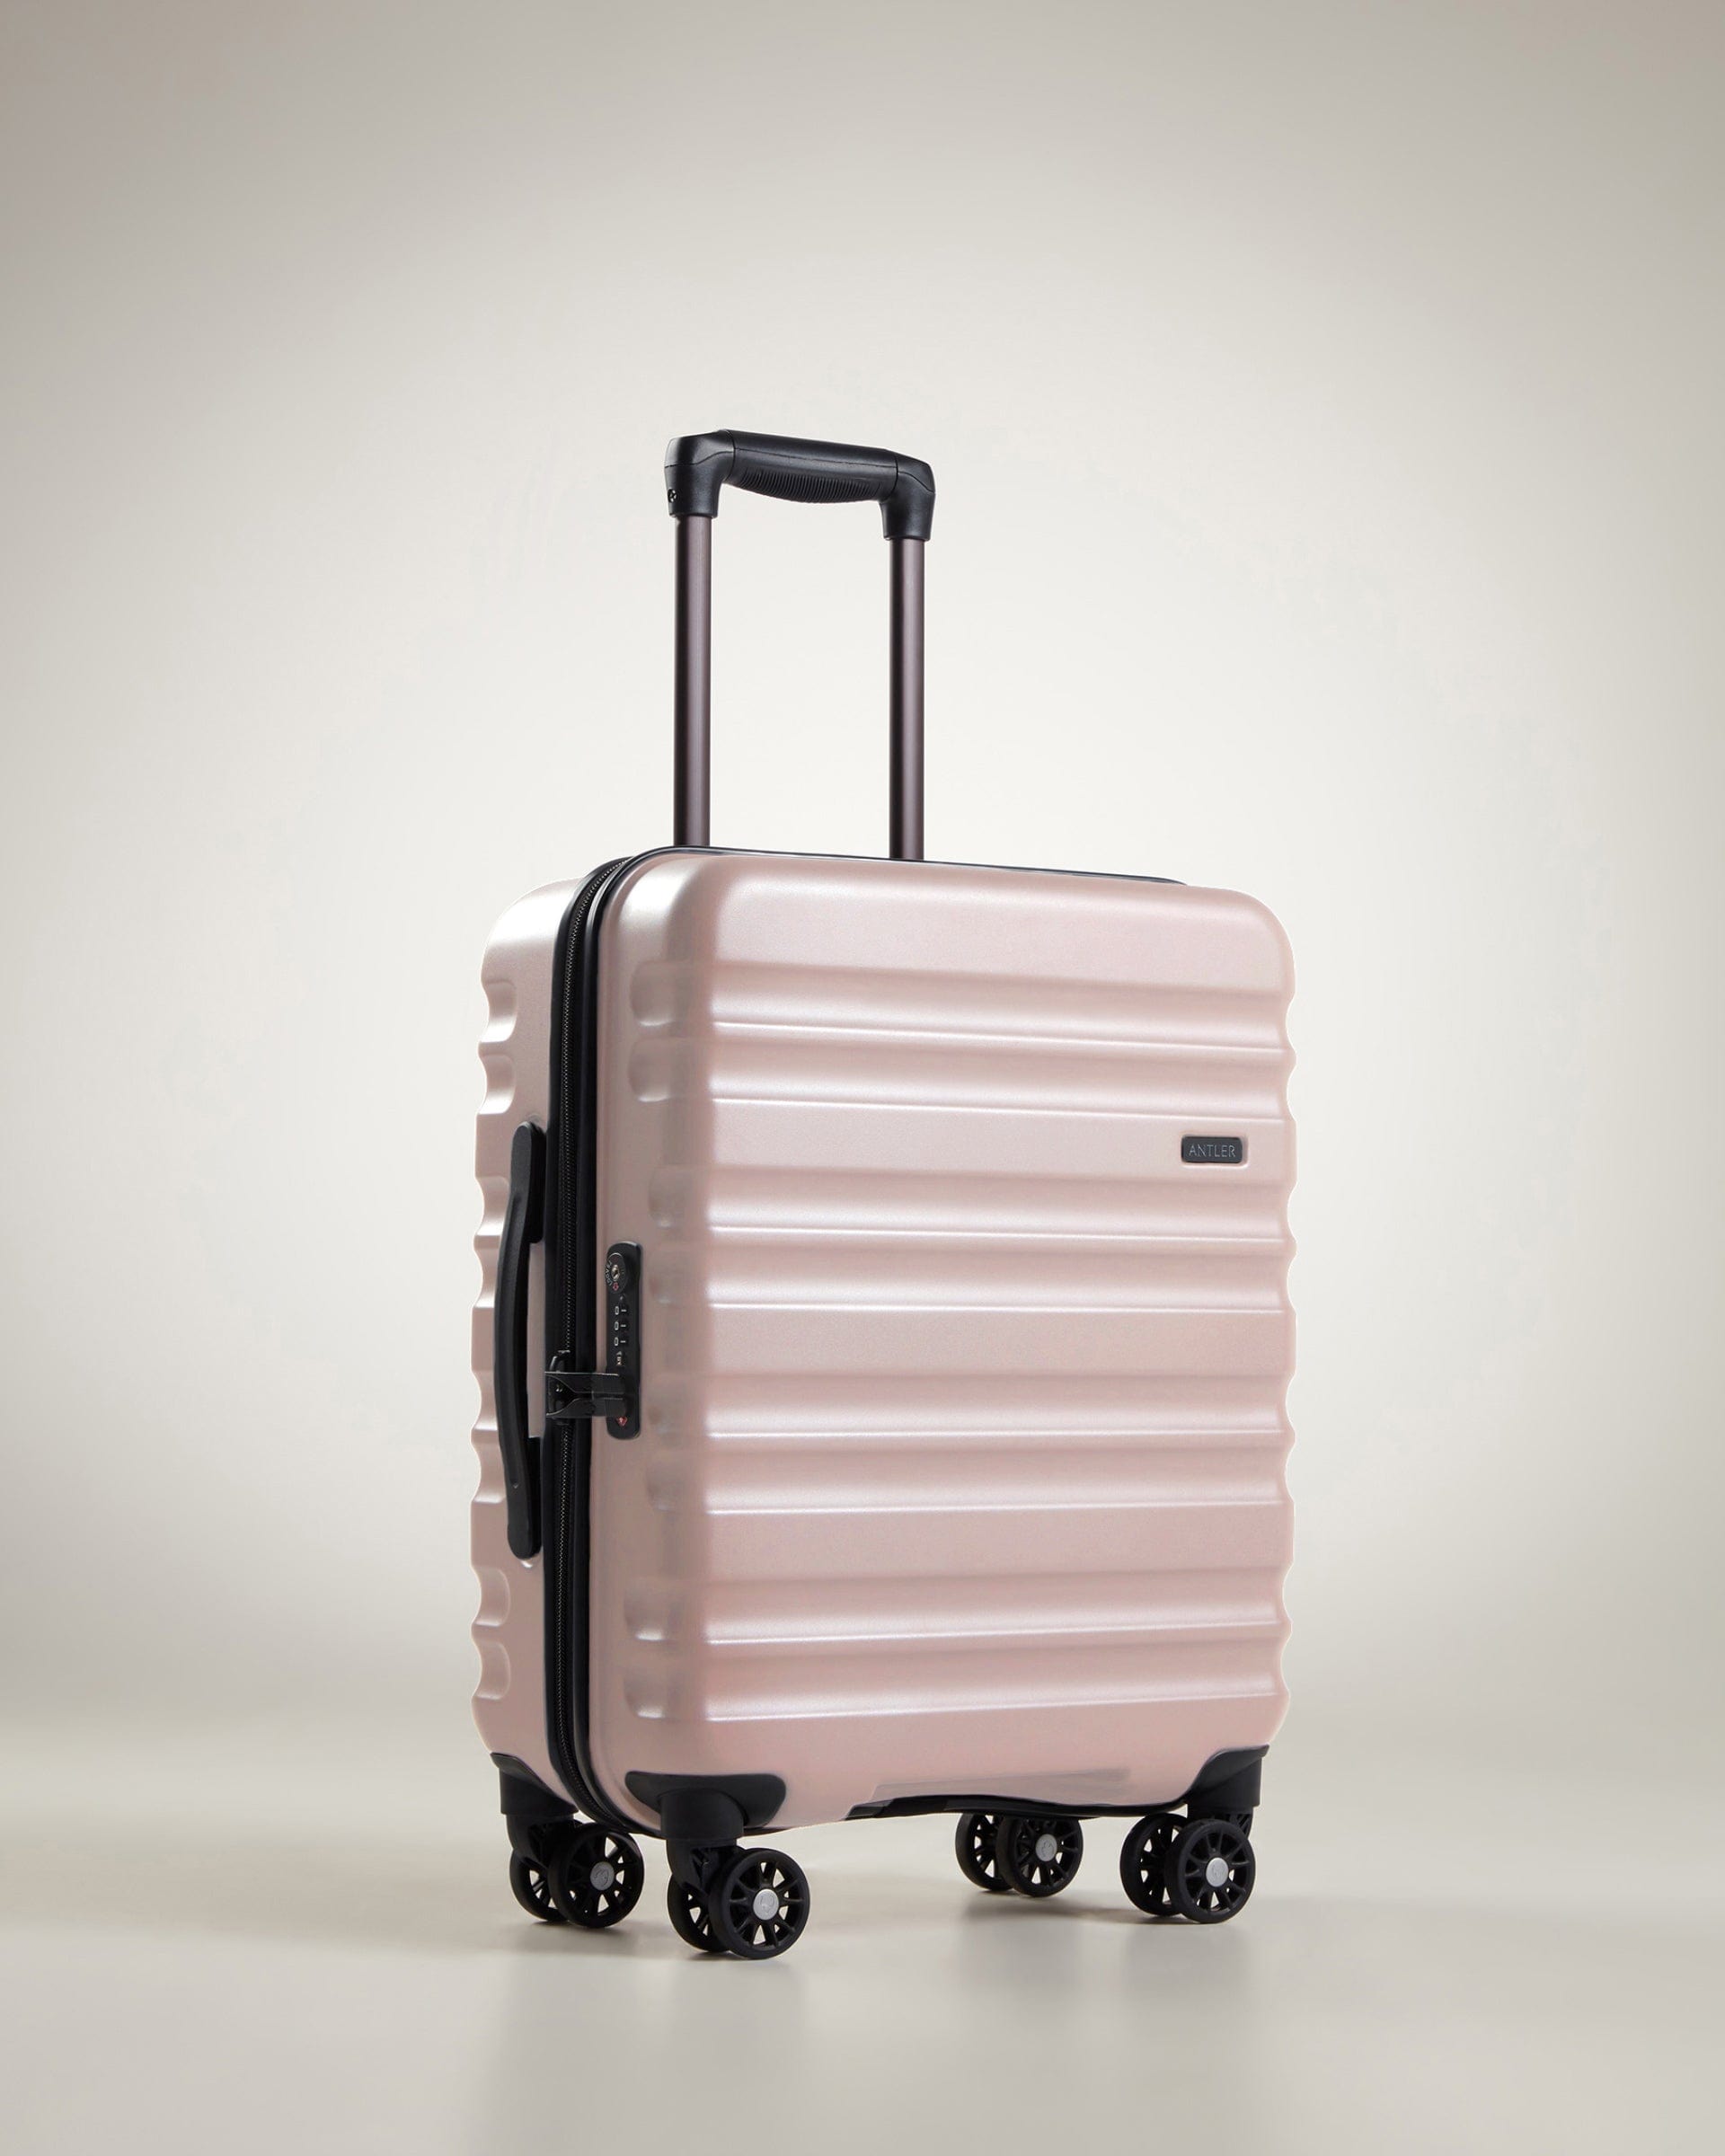 View Antler Clifton Cabin Suitcase In Blush Size 20 x 40 x 55 cm information